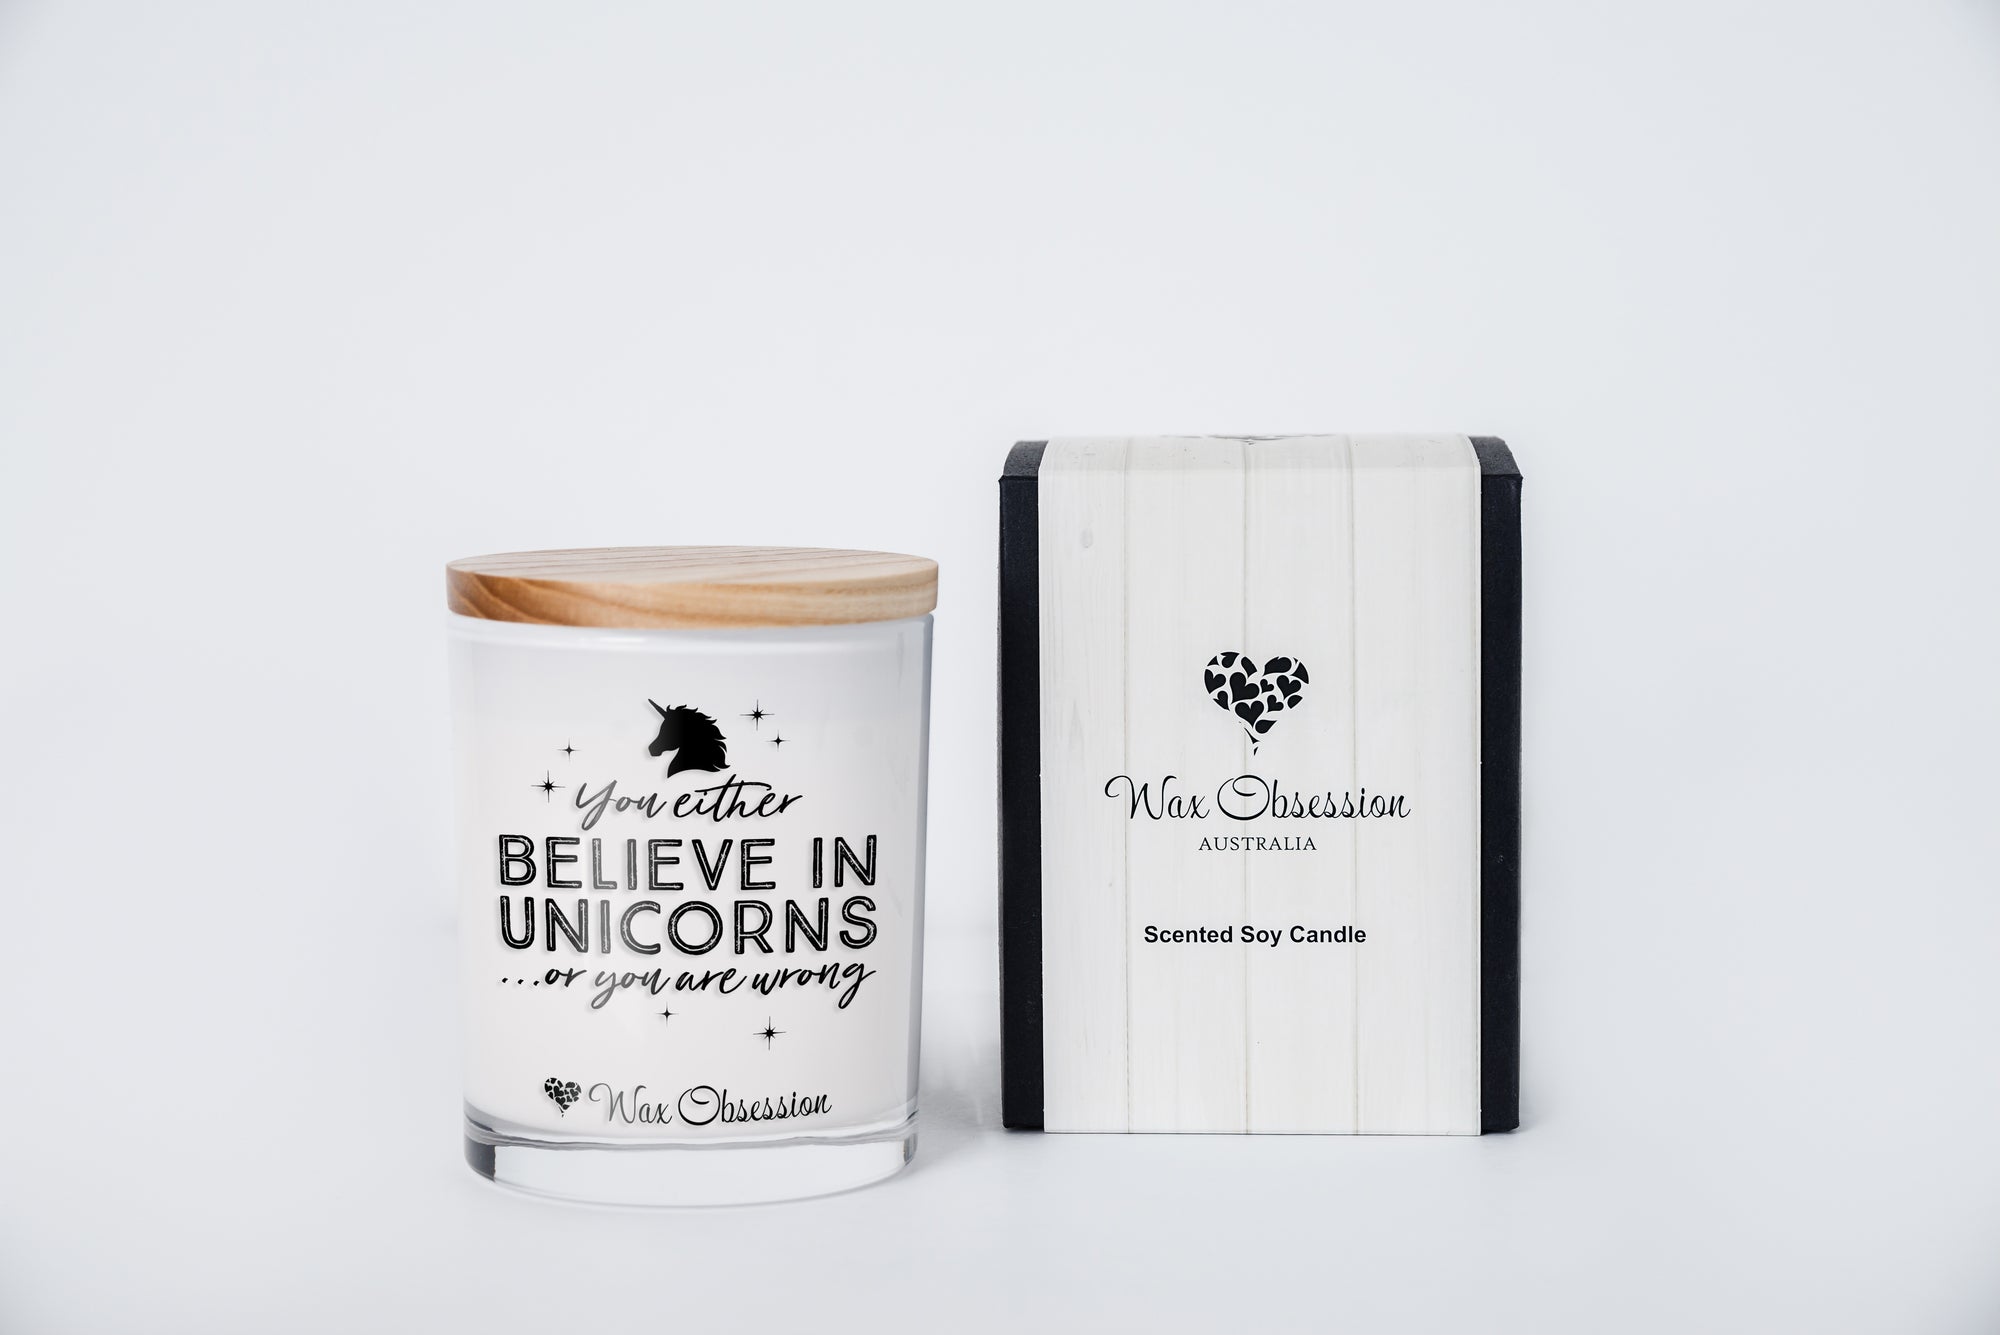 Quote Candle - You Either Believe In Unicorns Or You Are Wrong